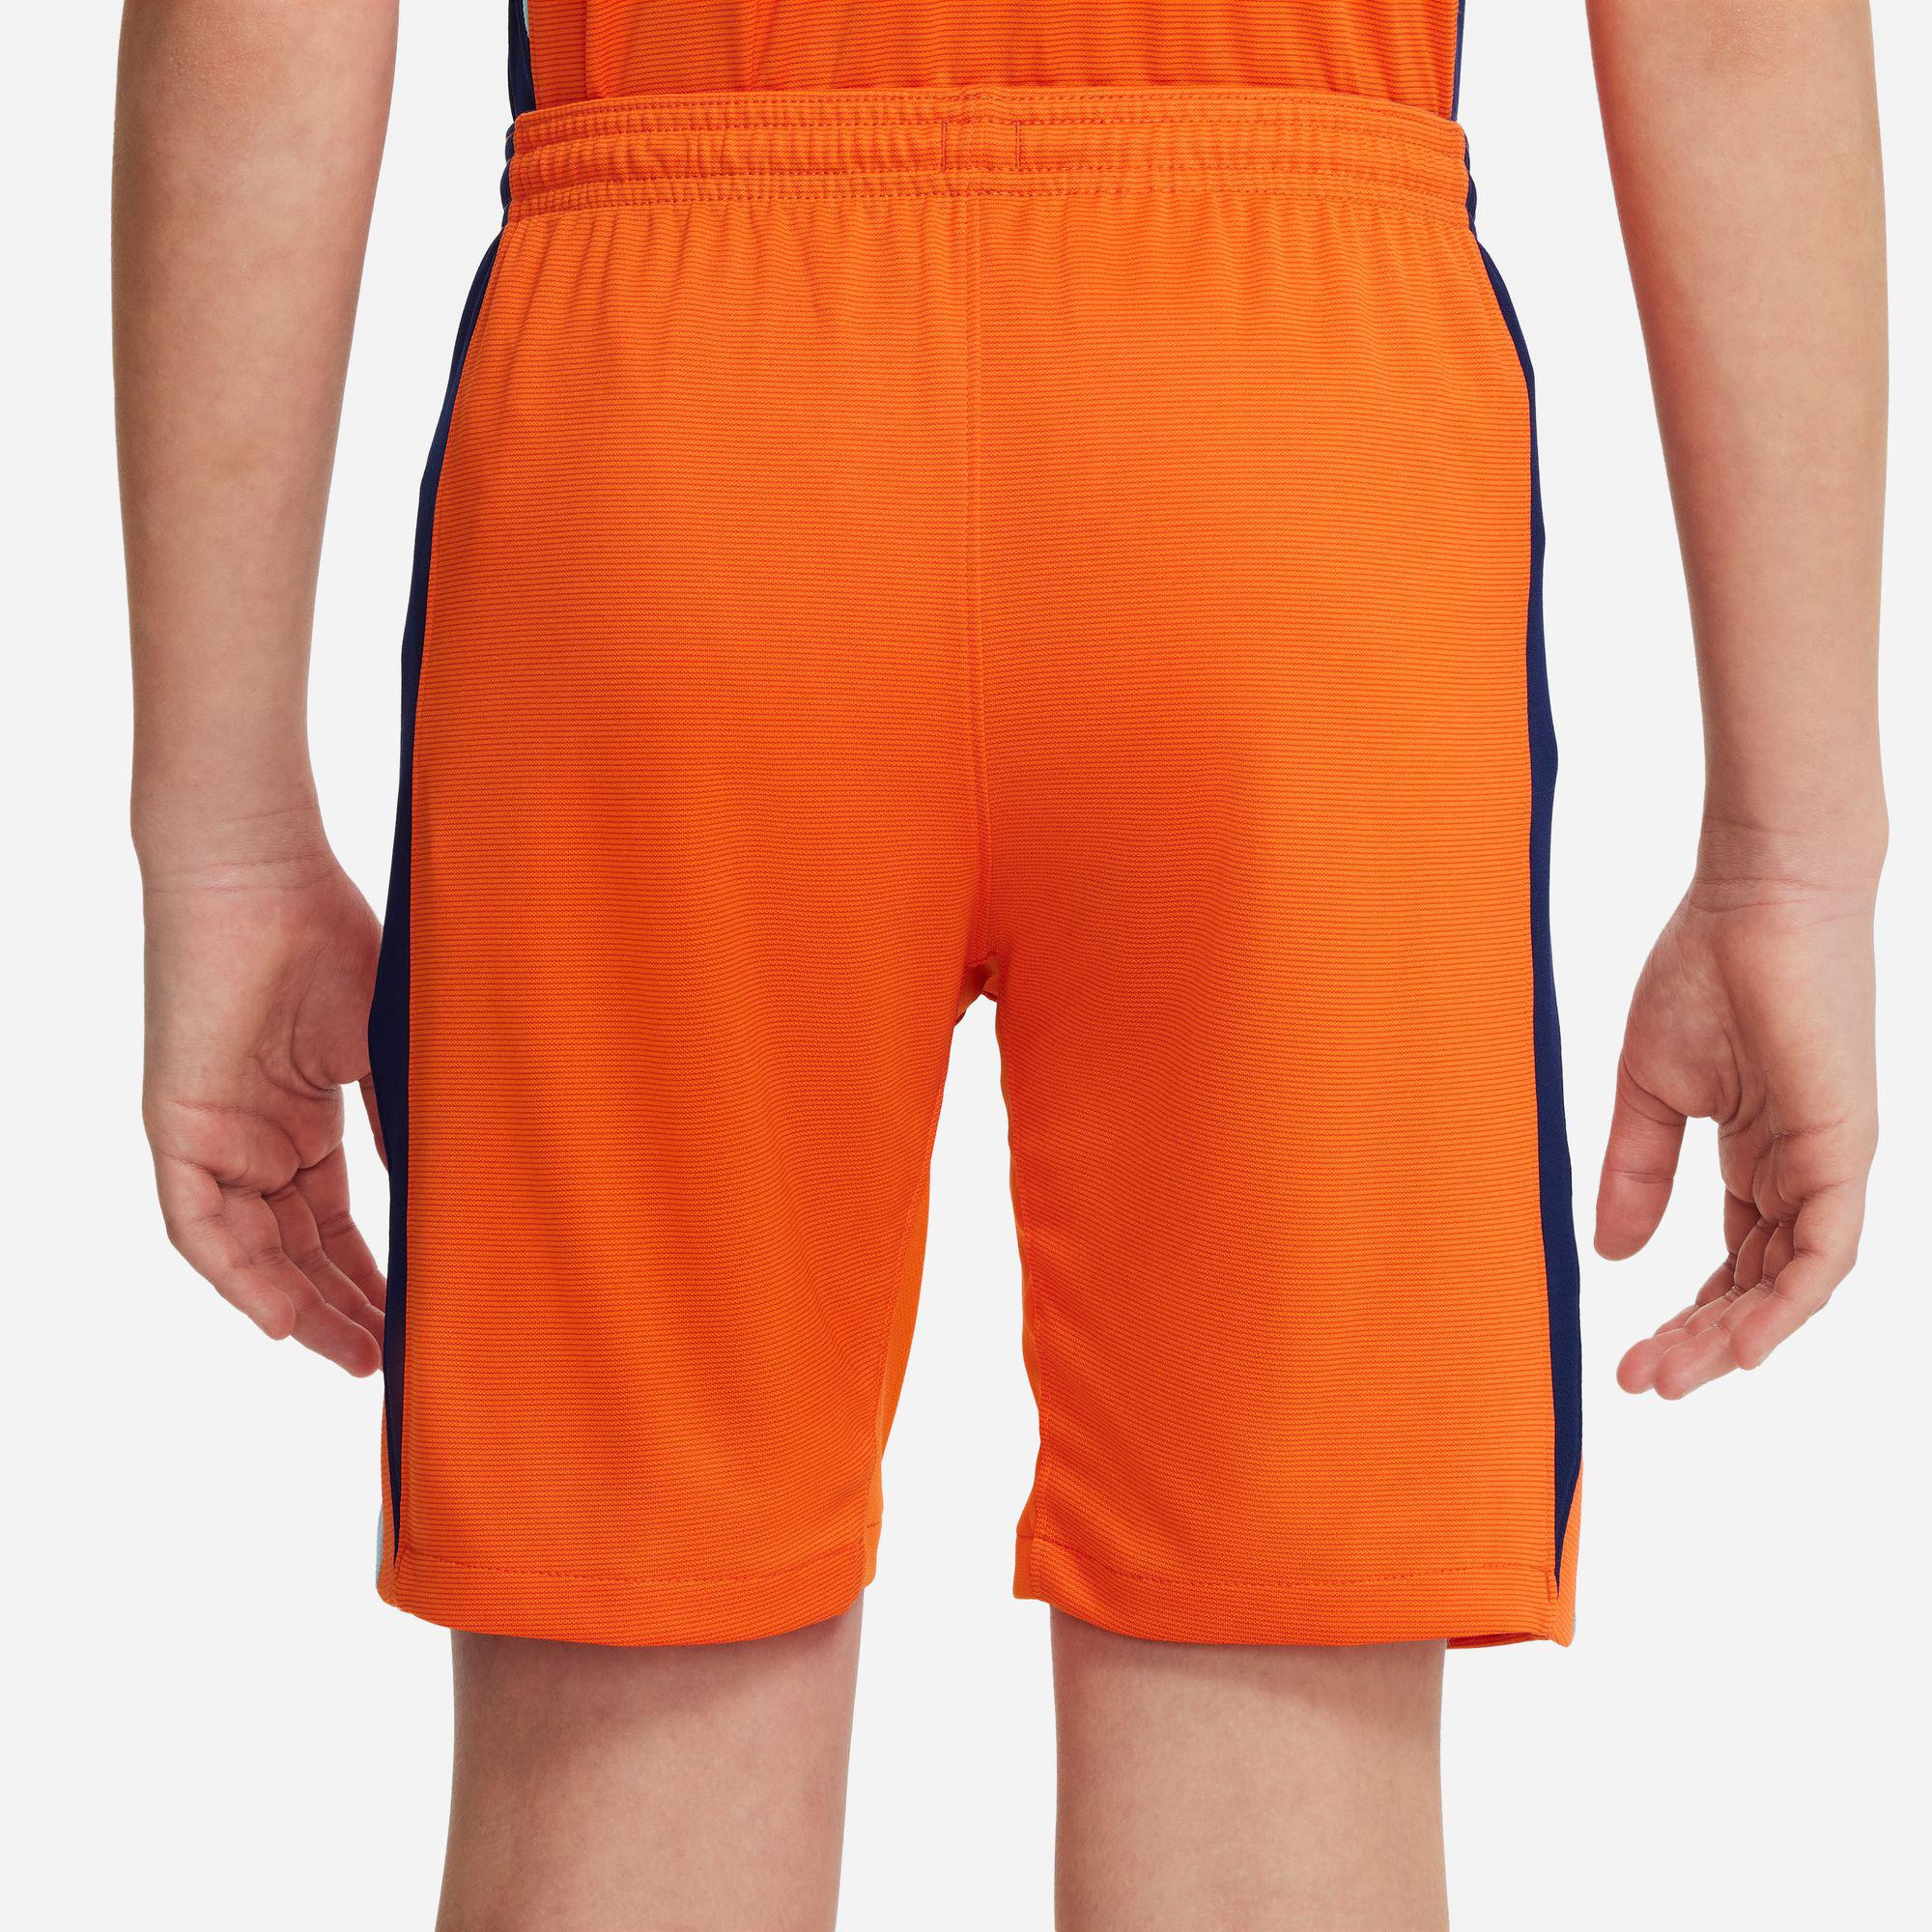 NIKE Holland Fussball Shorts Home Youth 